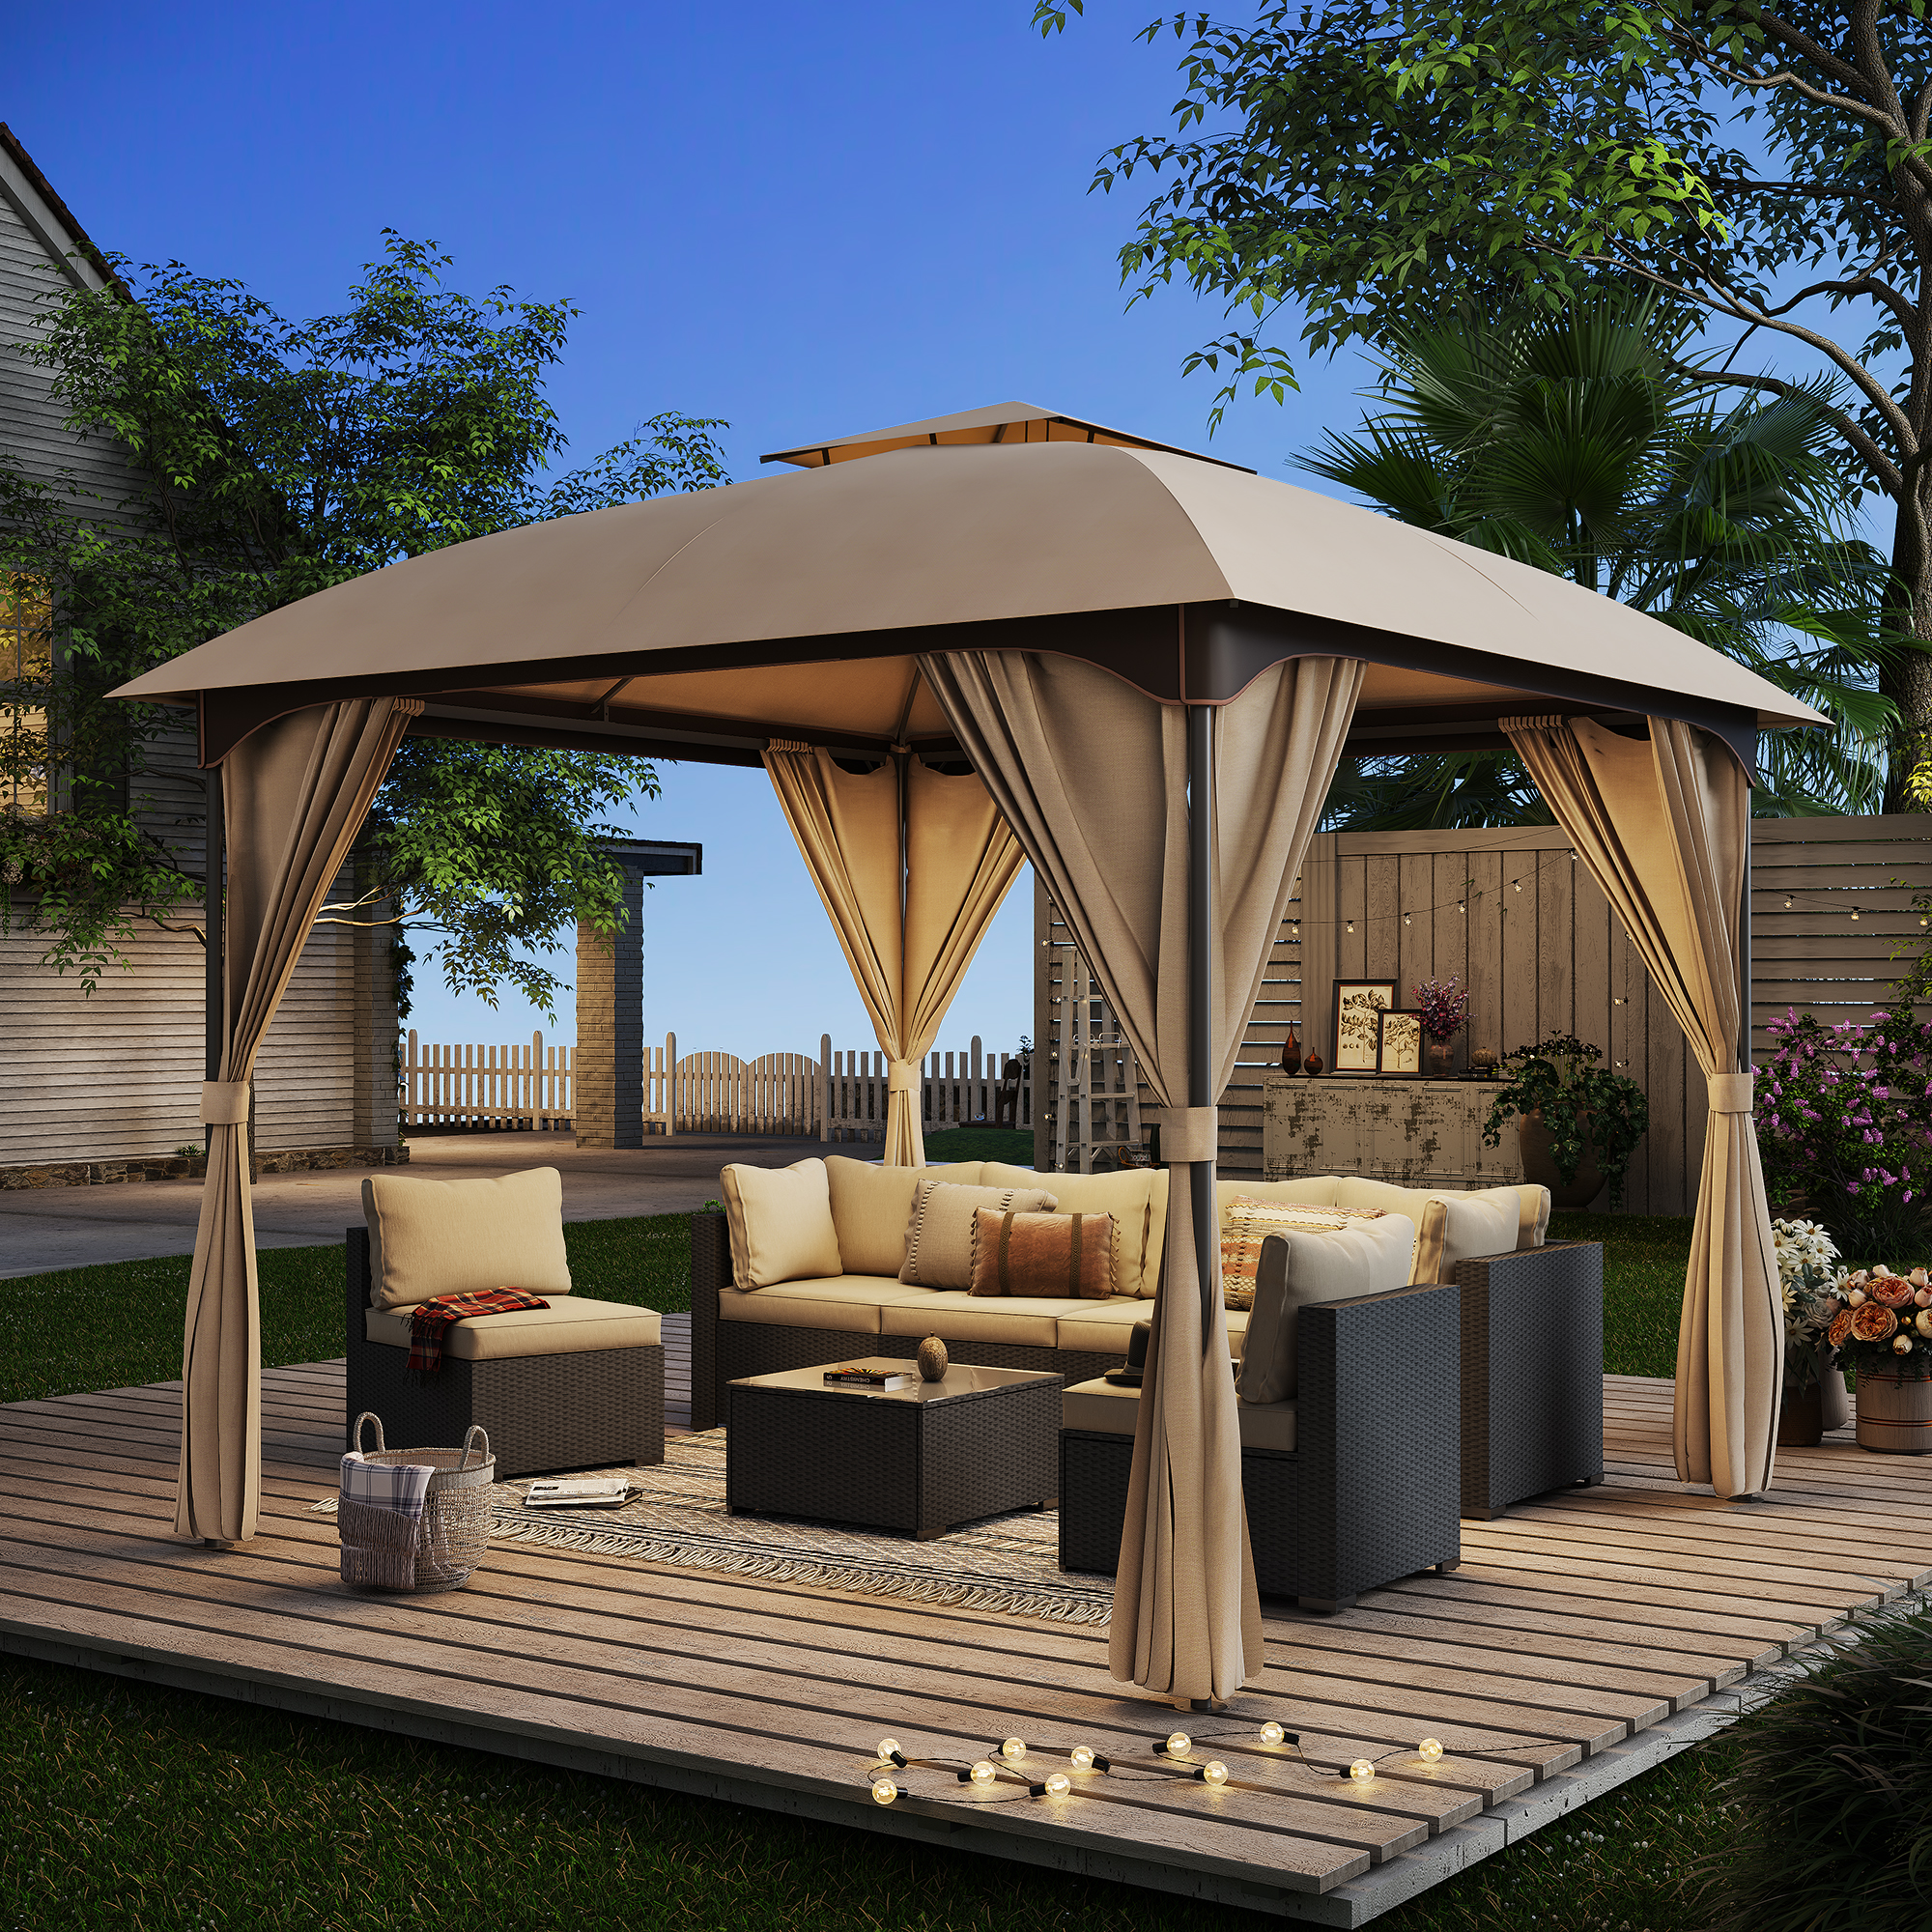 LAUSAINT HOME 10'x10' Outdoor Gazebo, Unique Arc Roof Design and Privacy Curtains Included, Khaki - image 1 of 11